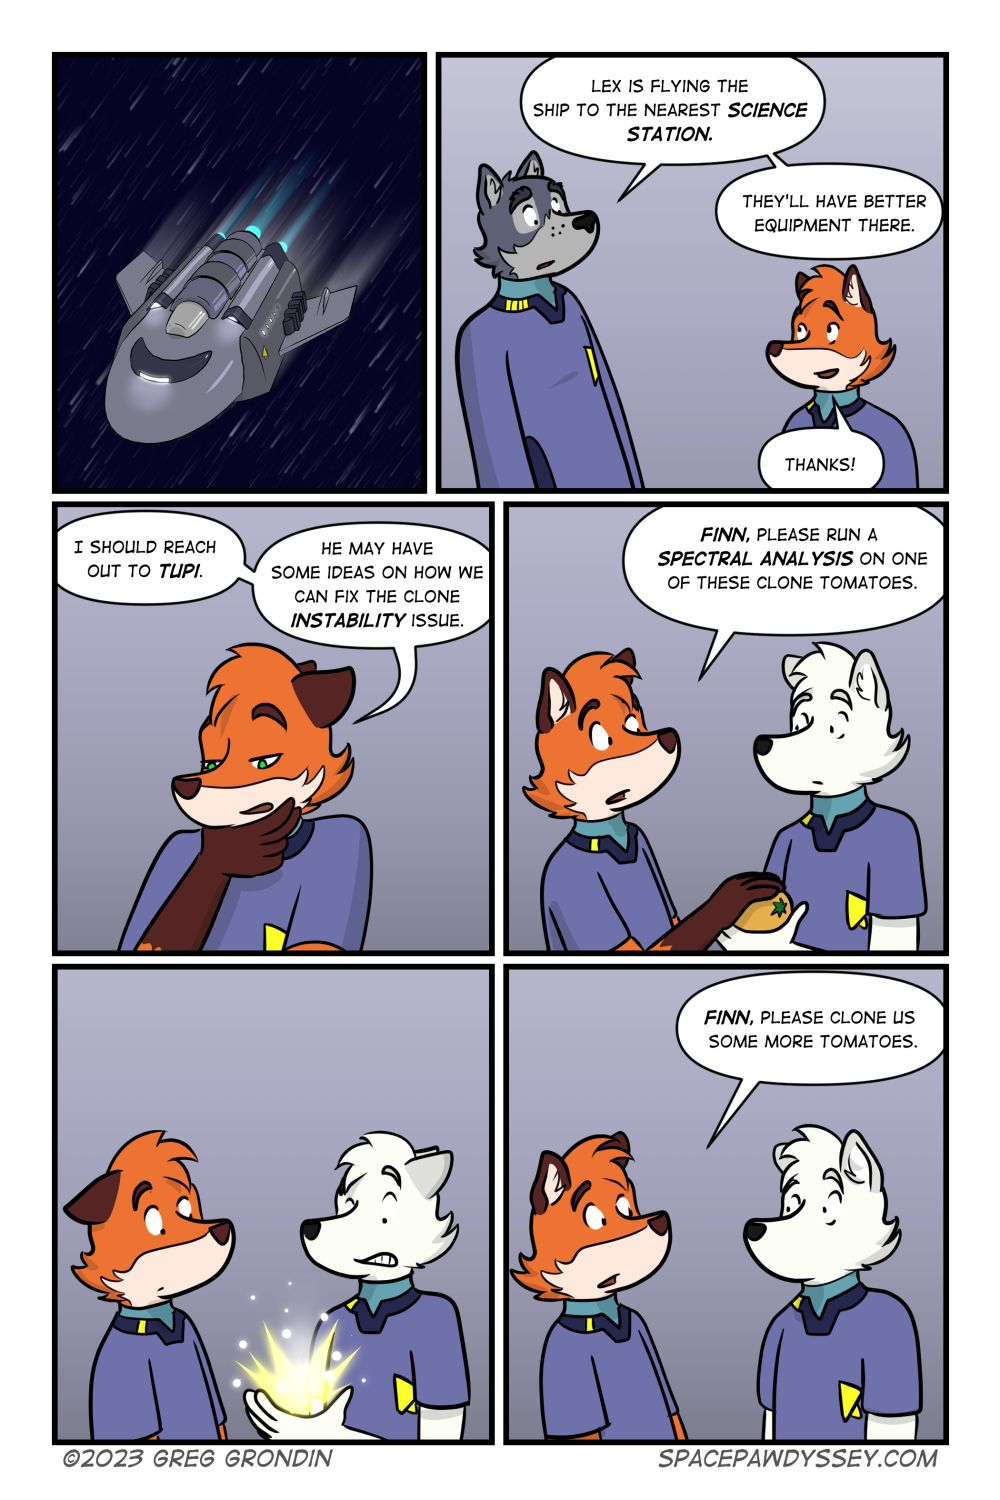 Space Pawdyssey #631